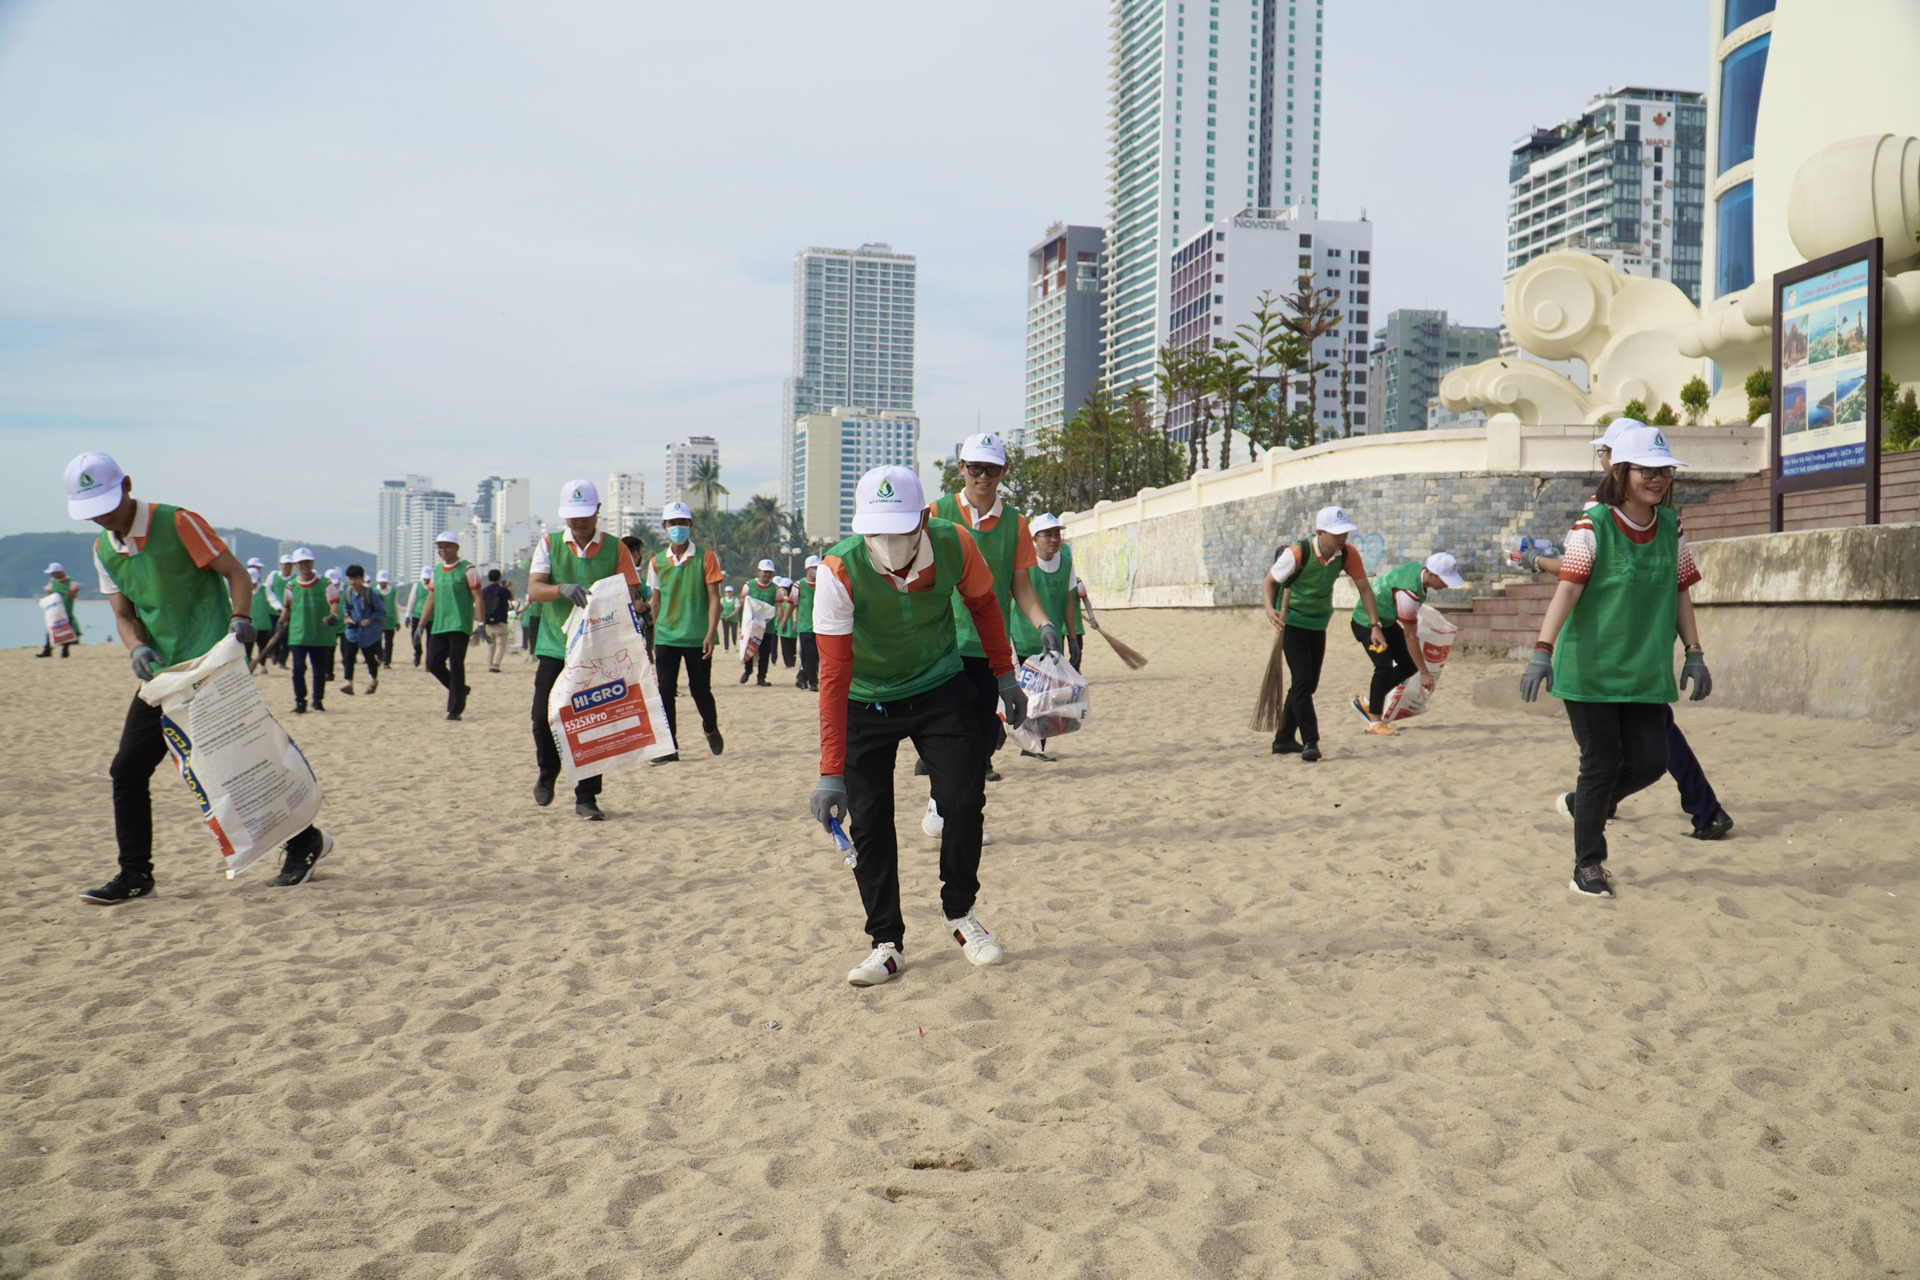 Respond to the program 'Green Action - For a Green Future' by cleaning up trash at the beach. Photo: KS.